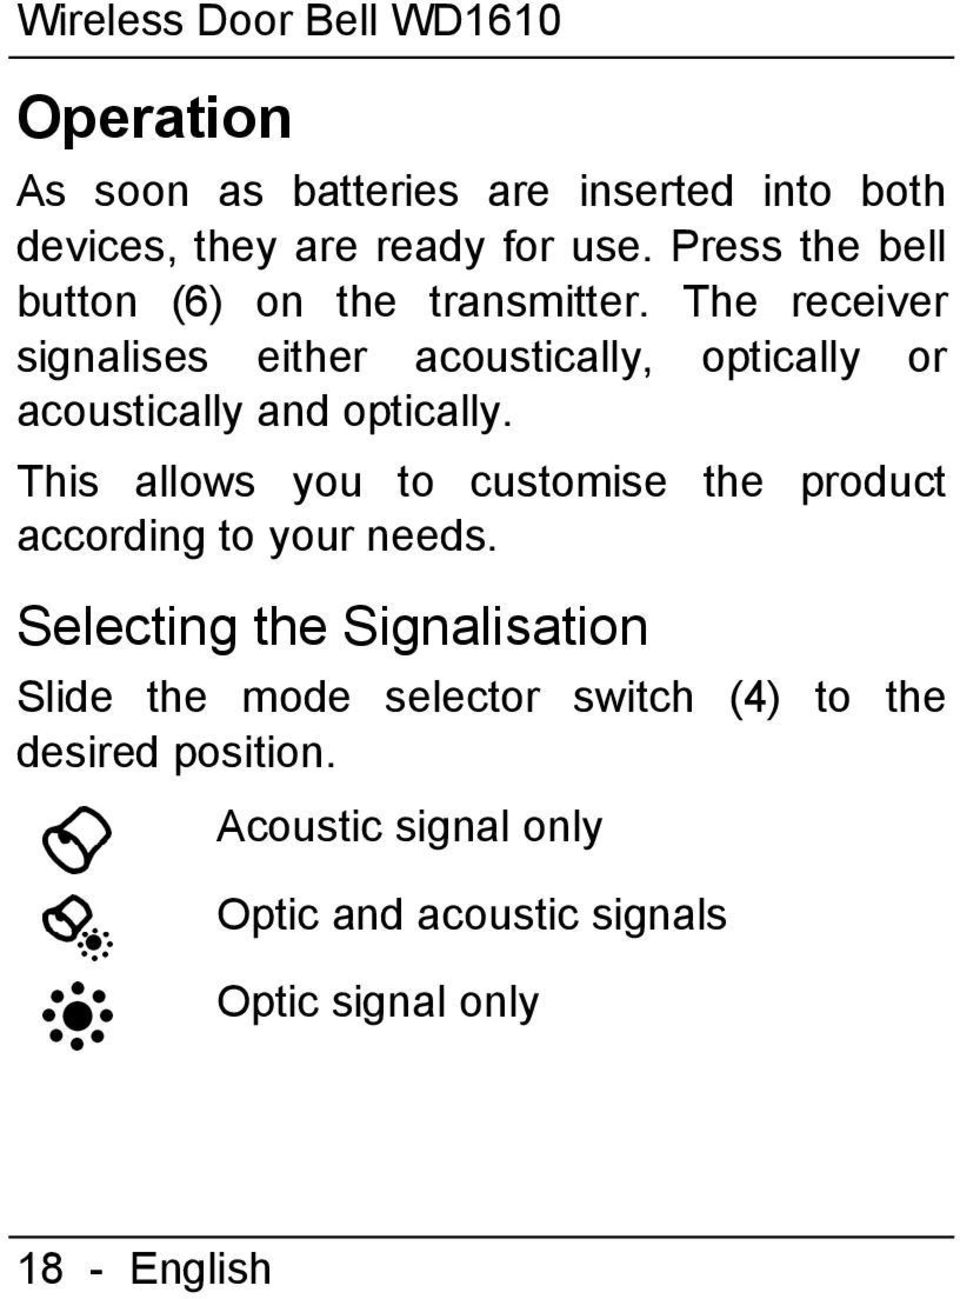 The receiver signalises either acoustically, optically or acoustically and optically.